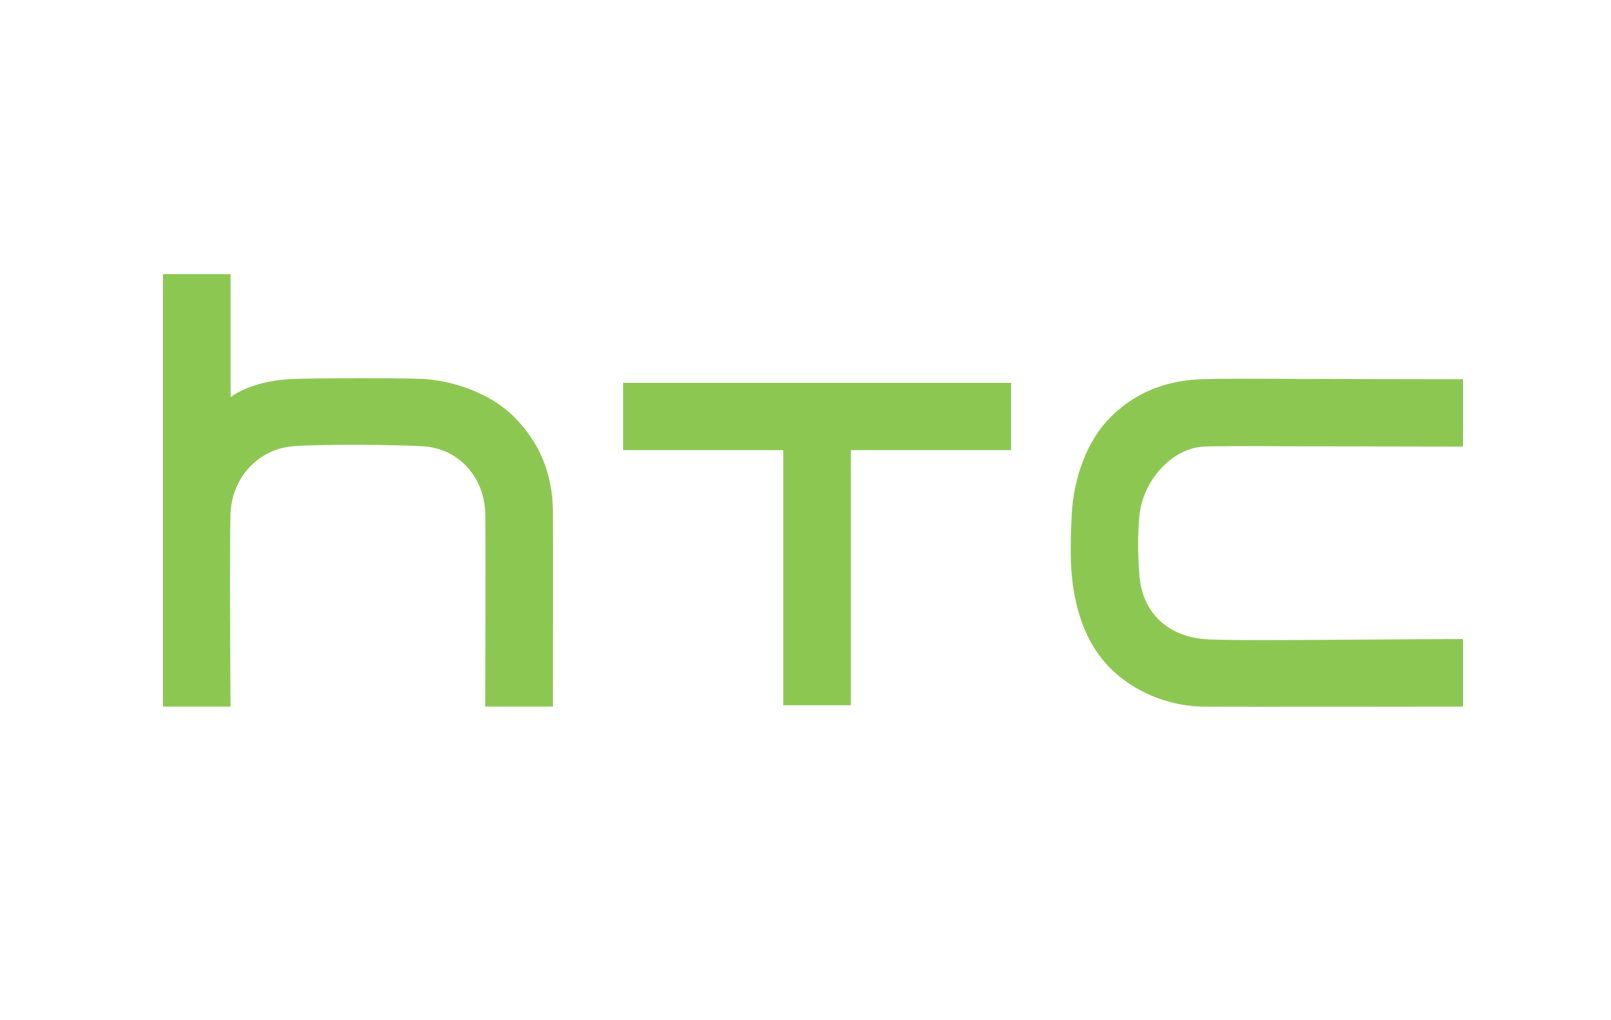 Google’s $1.1 billion acquisition of HTC accepted by Taiwanese Investment Commission